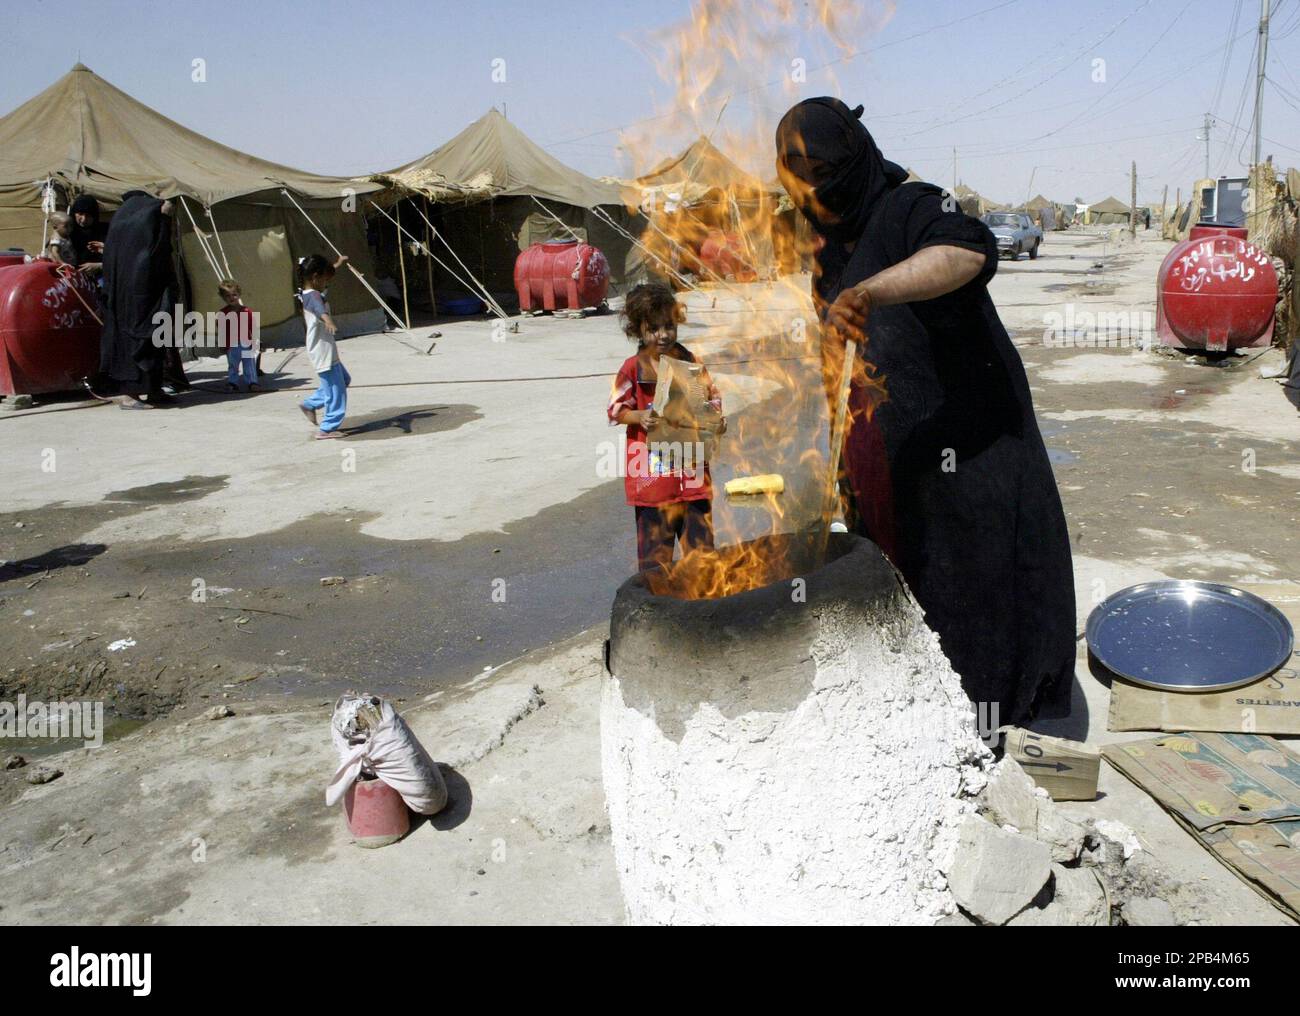 An Iraqi Shiite woman bakes bread in a camp outside of Najaf, 160 kilometers (100 miles) south of Baghdad, Iraq on Tuesday, Sept. 11, 2007. The United Nations' refugee agency estimates that about 2,000 Iraqis leave their homes every day due to violence and economic uncertainty resulting from the four-year conflict. (AP Photo/Alaa al-Marjani) Stock Photo